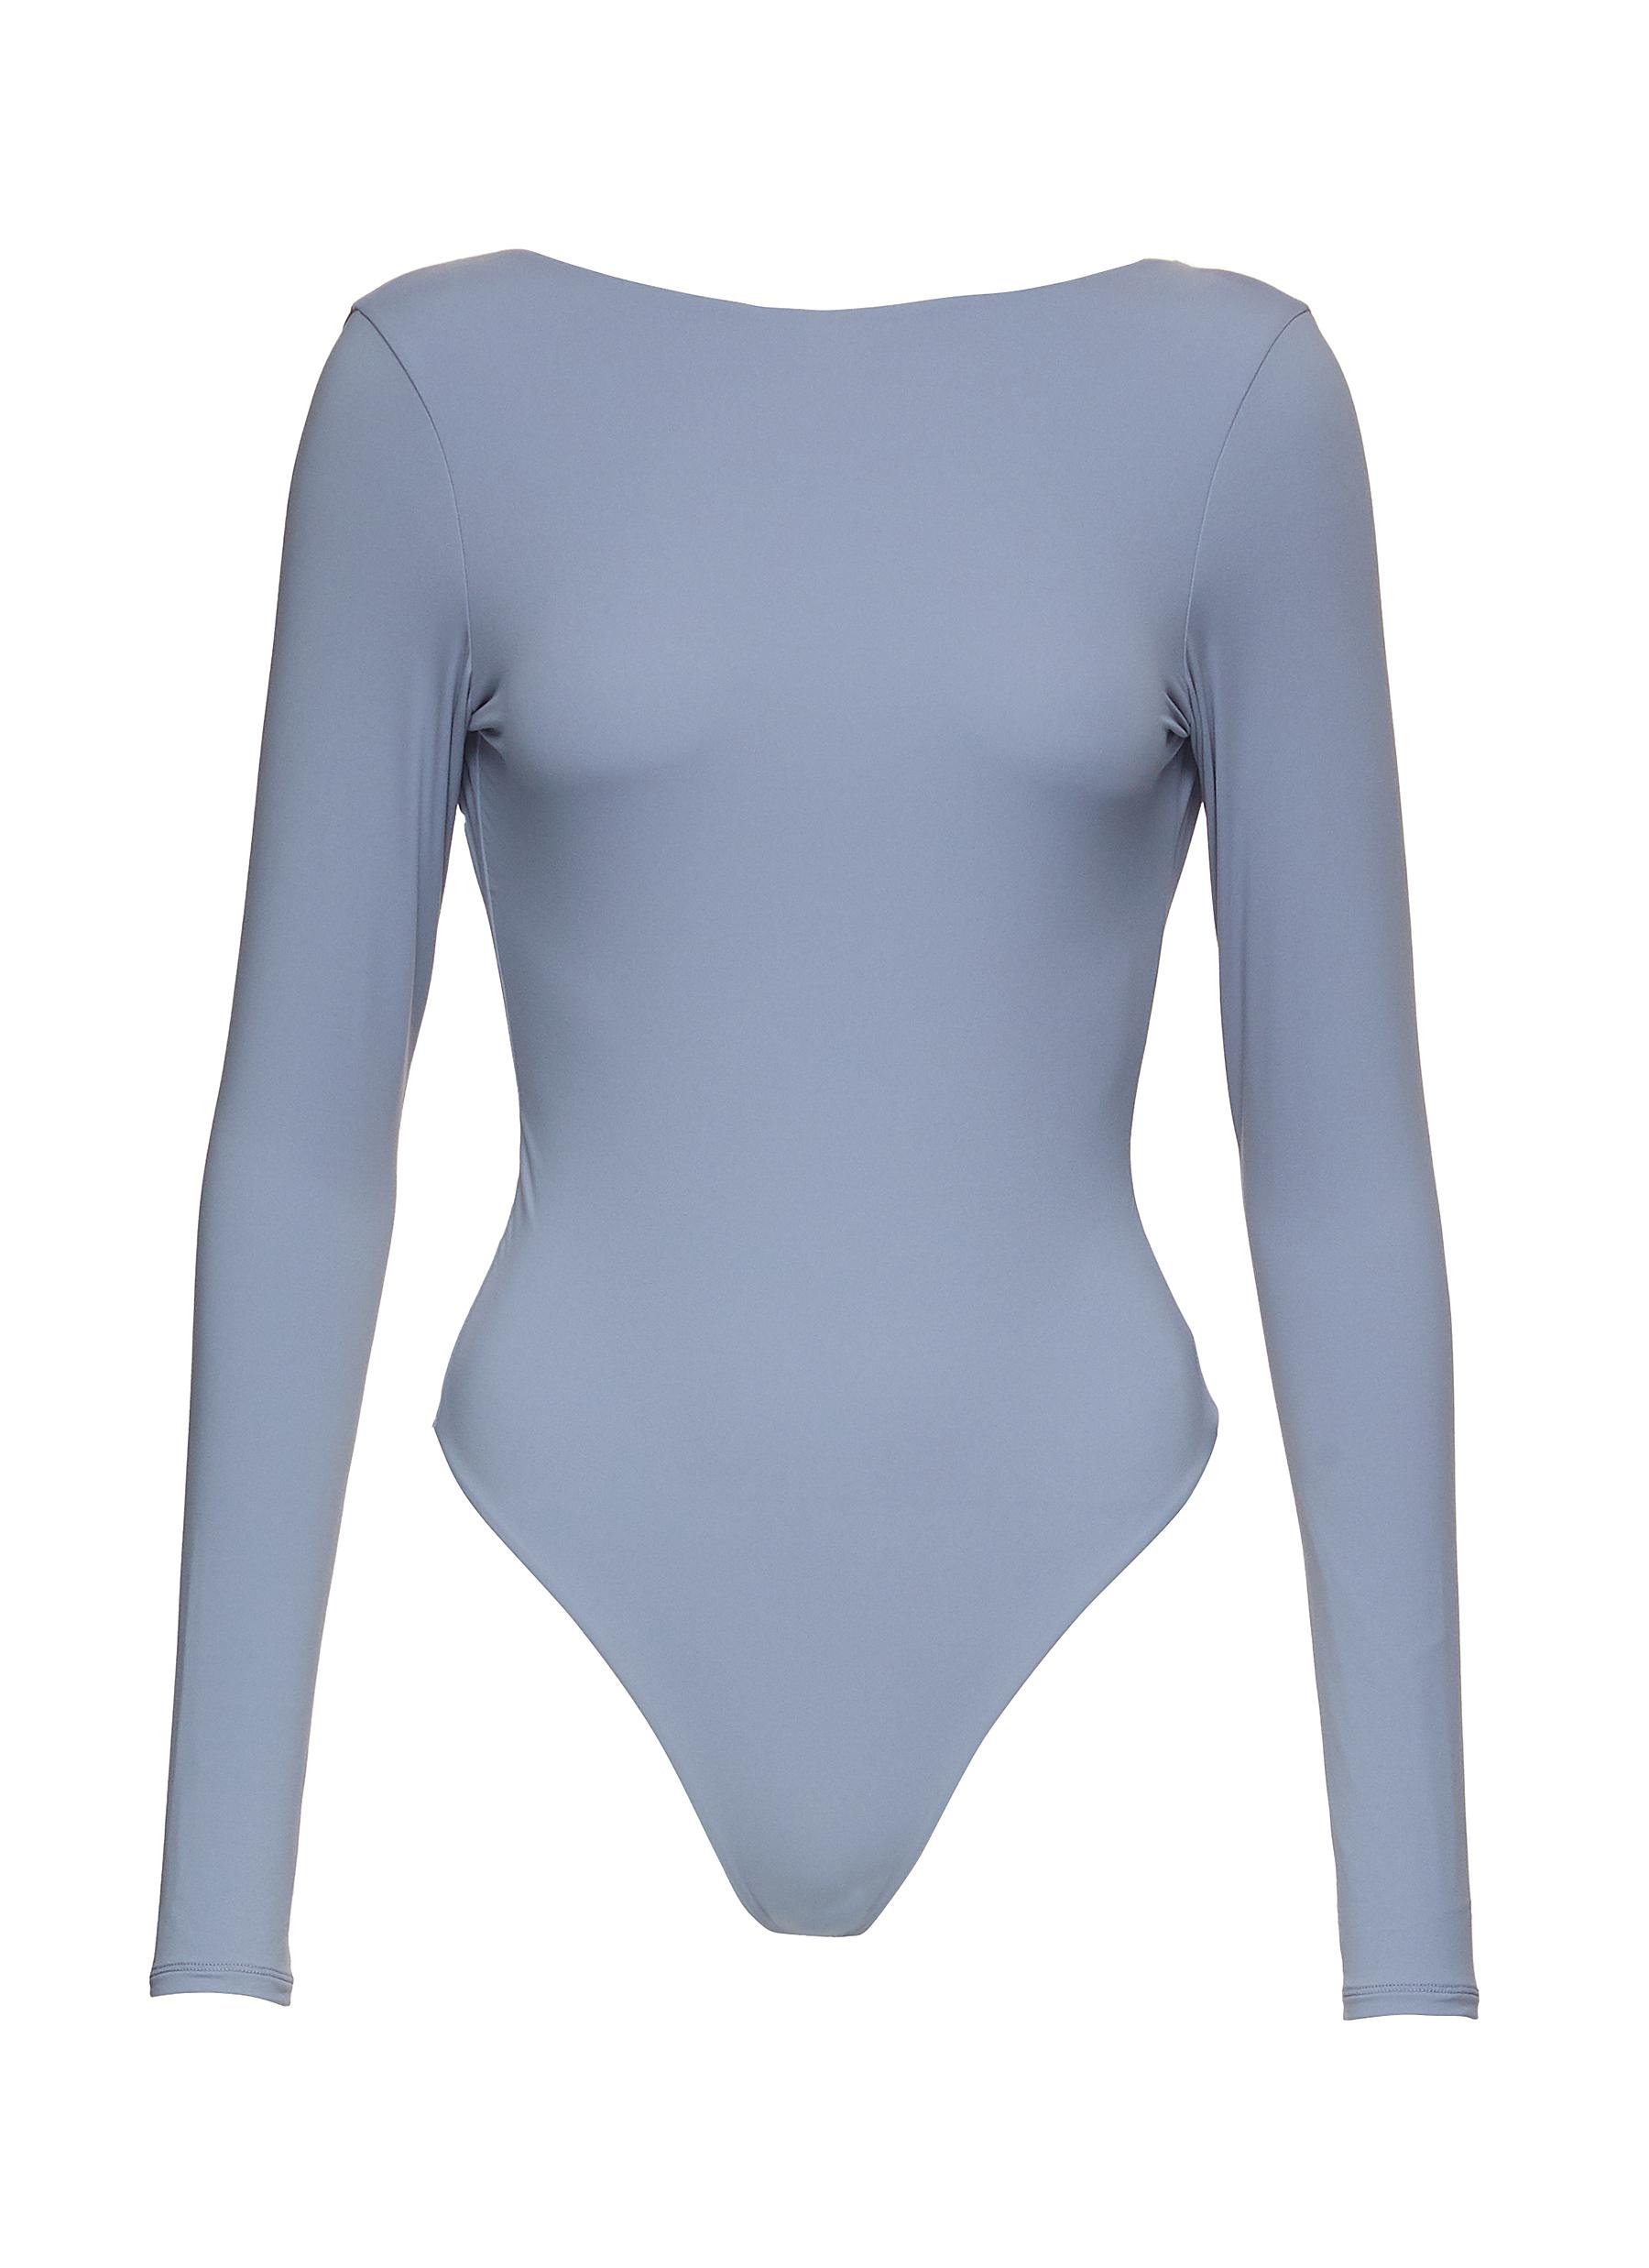 s Hottest New Release Is a Buttery Soft Bodysuit That's Great for  Summer